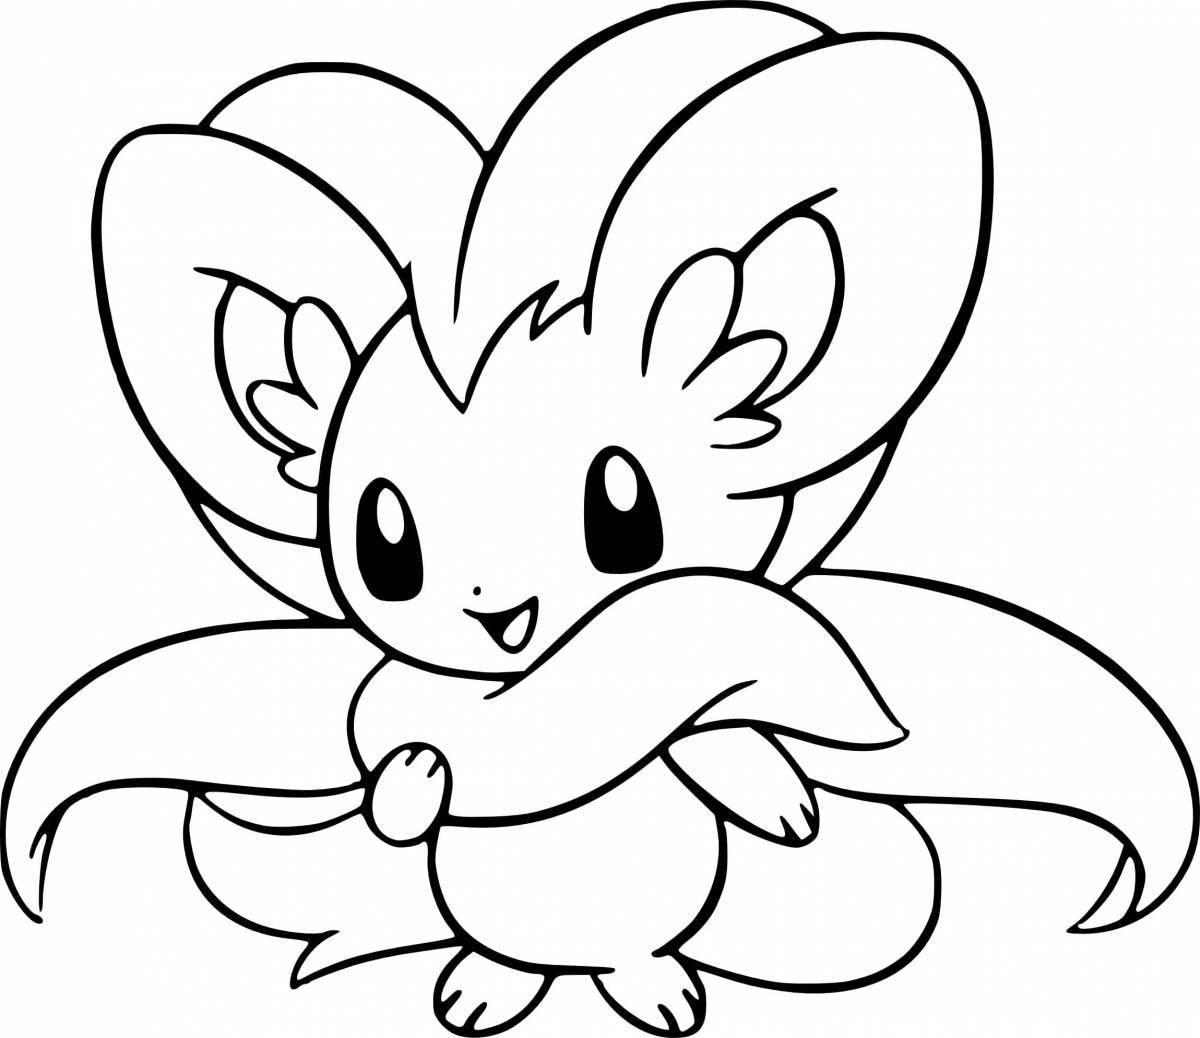 Coloring pages pokemon pictures